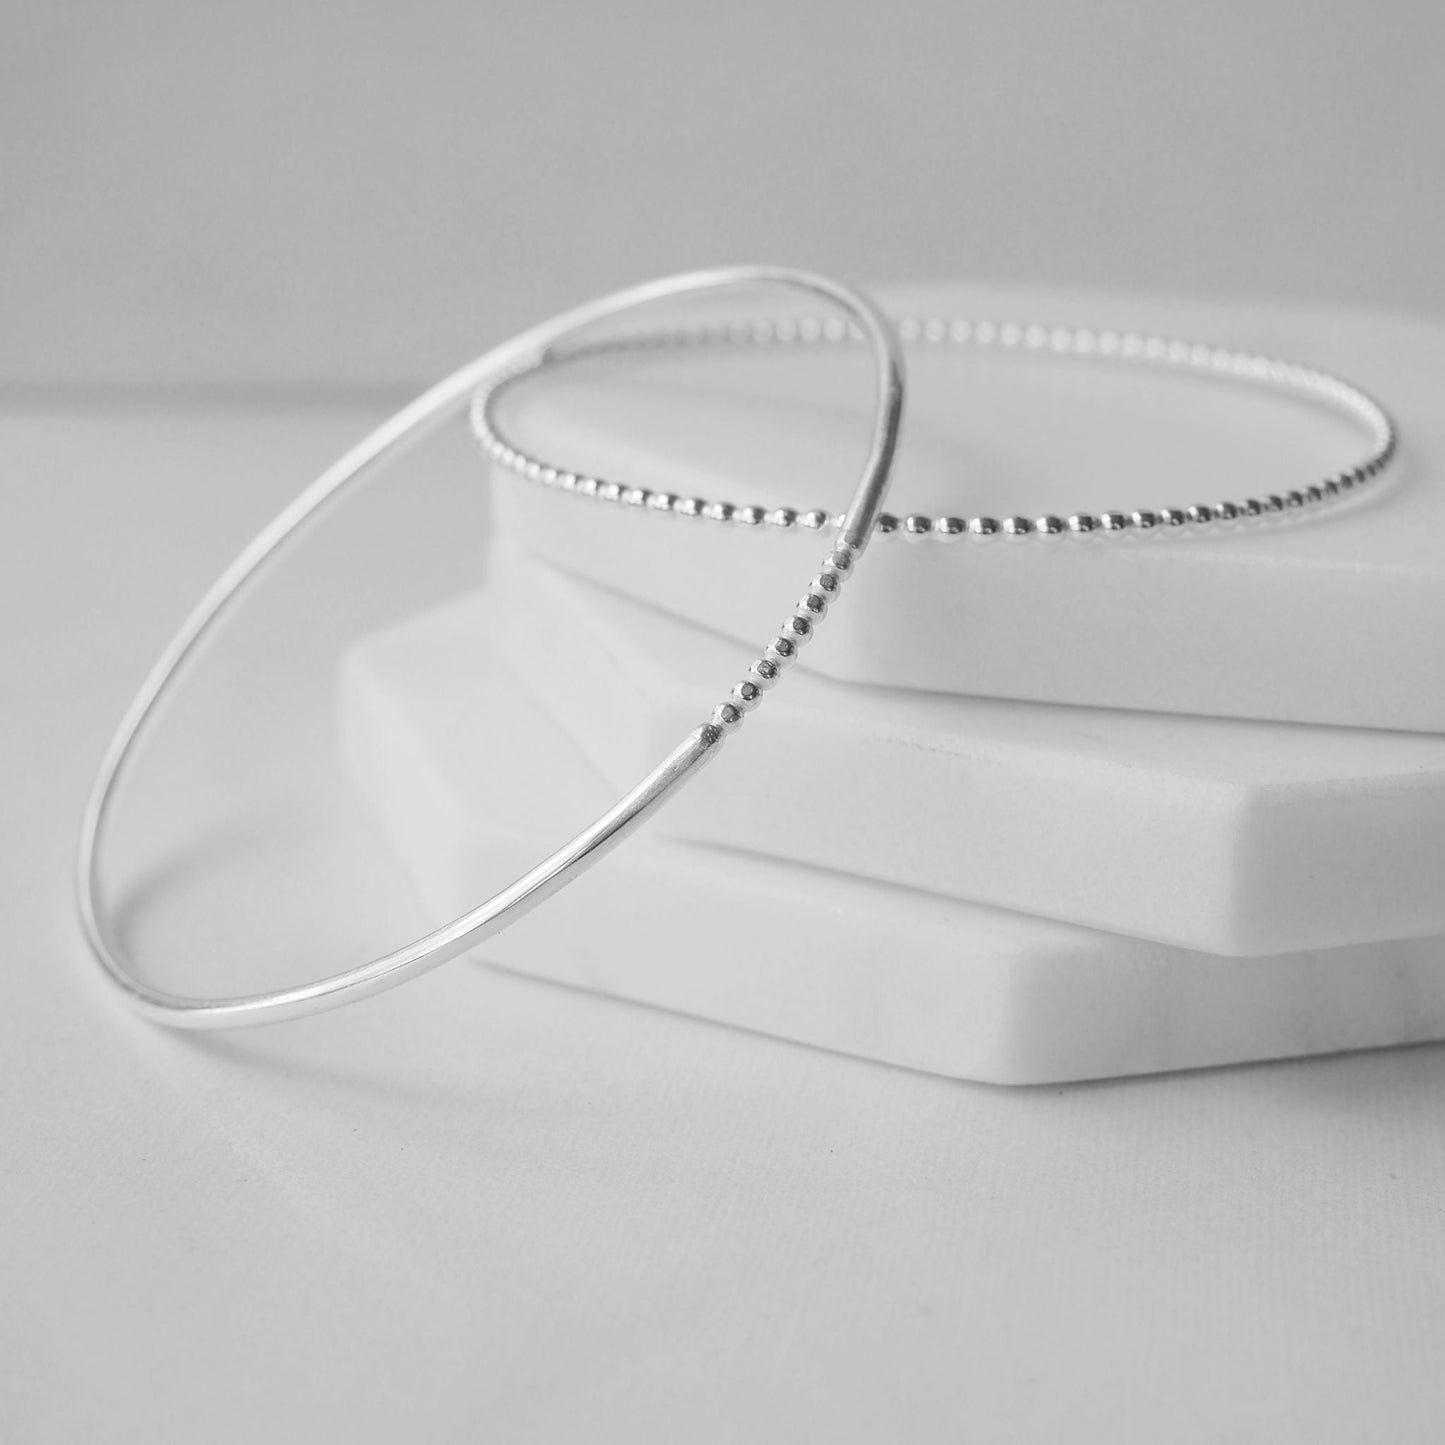 Two silver bangles on a white background, both textured. They are round in profile with a beaded texture - one with just a section and one with a full beaded looki. Handmade in Scotland by maram jewellery